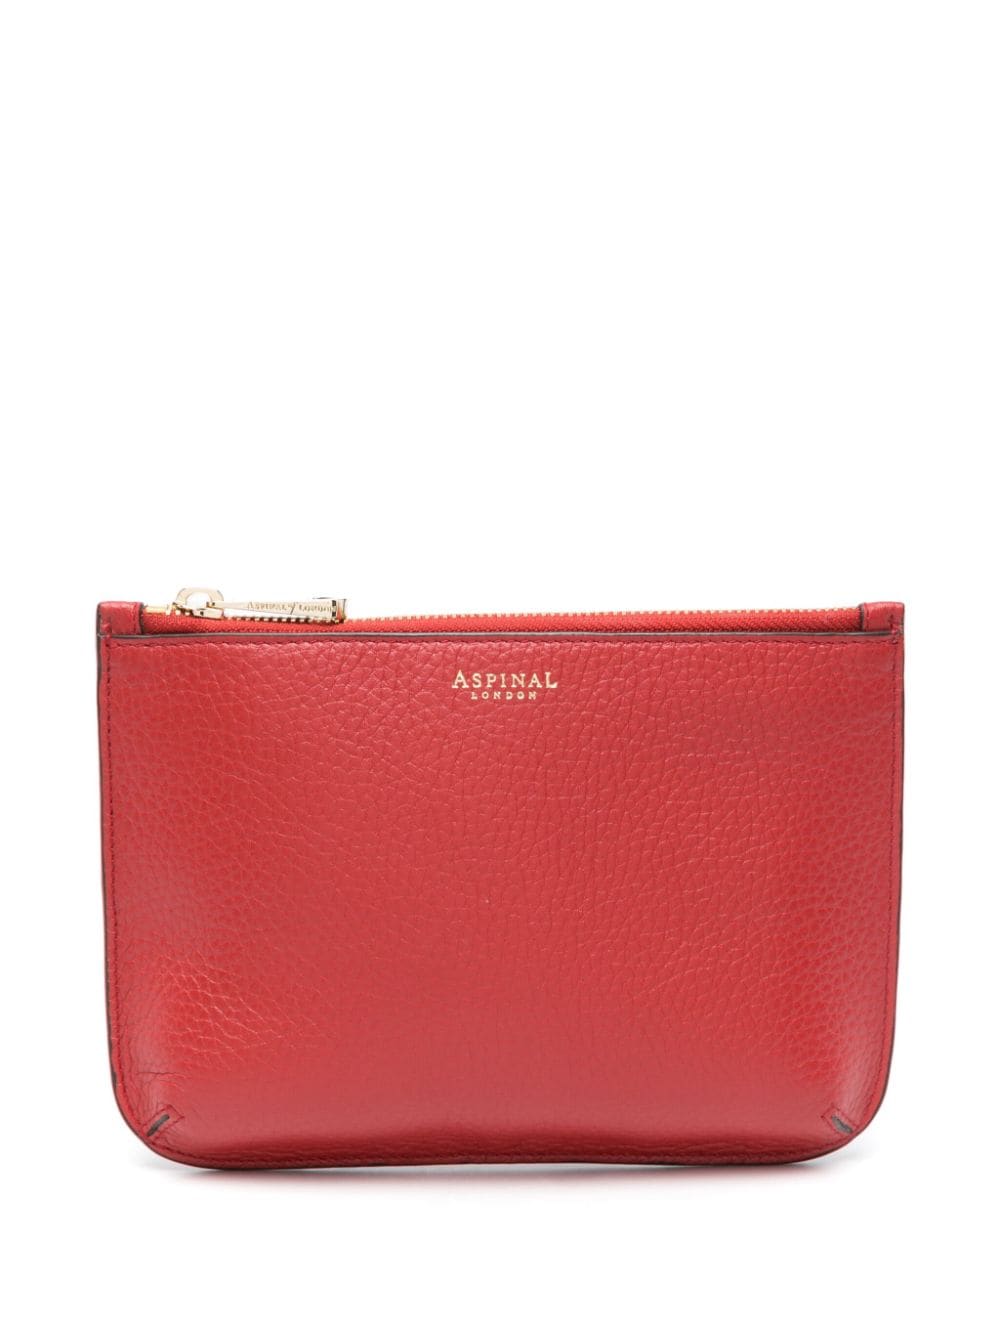 Aspinal Of London Medium Pouch Bag In Red